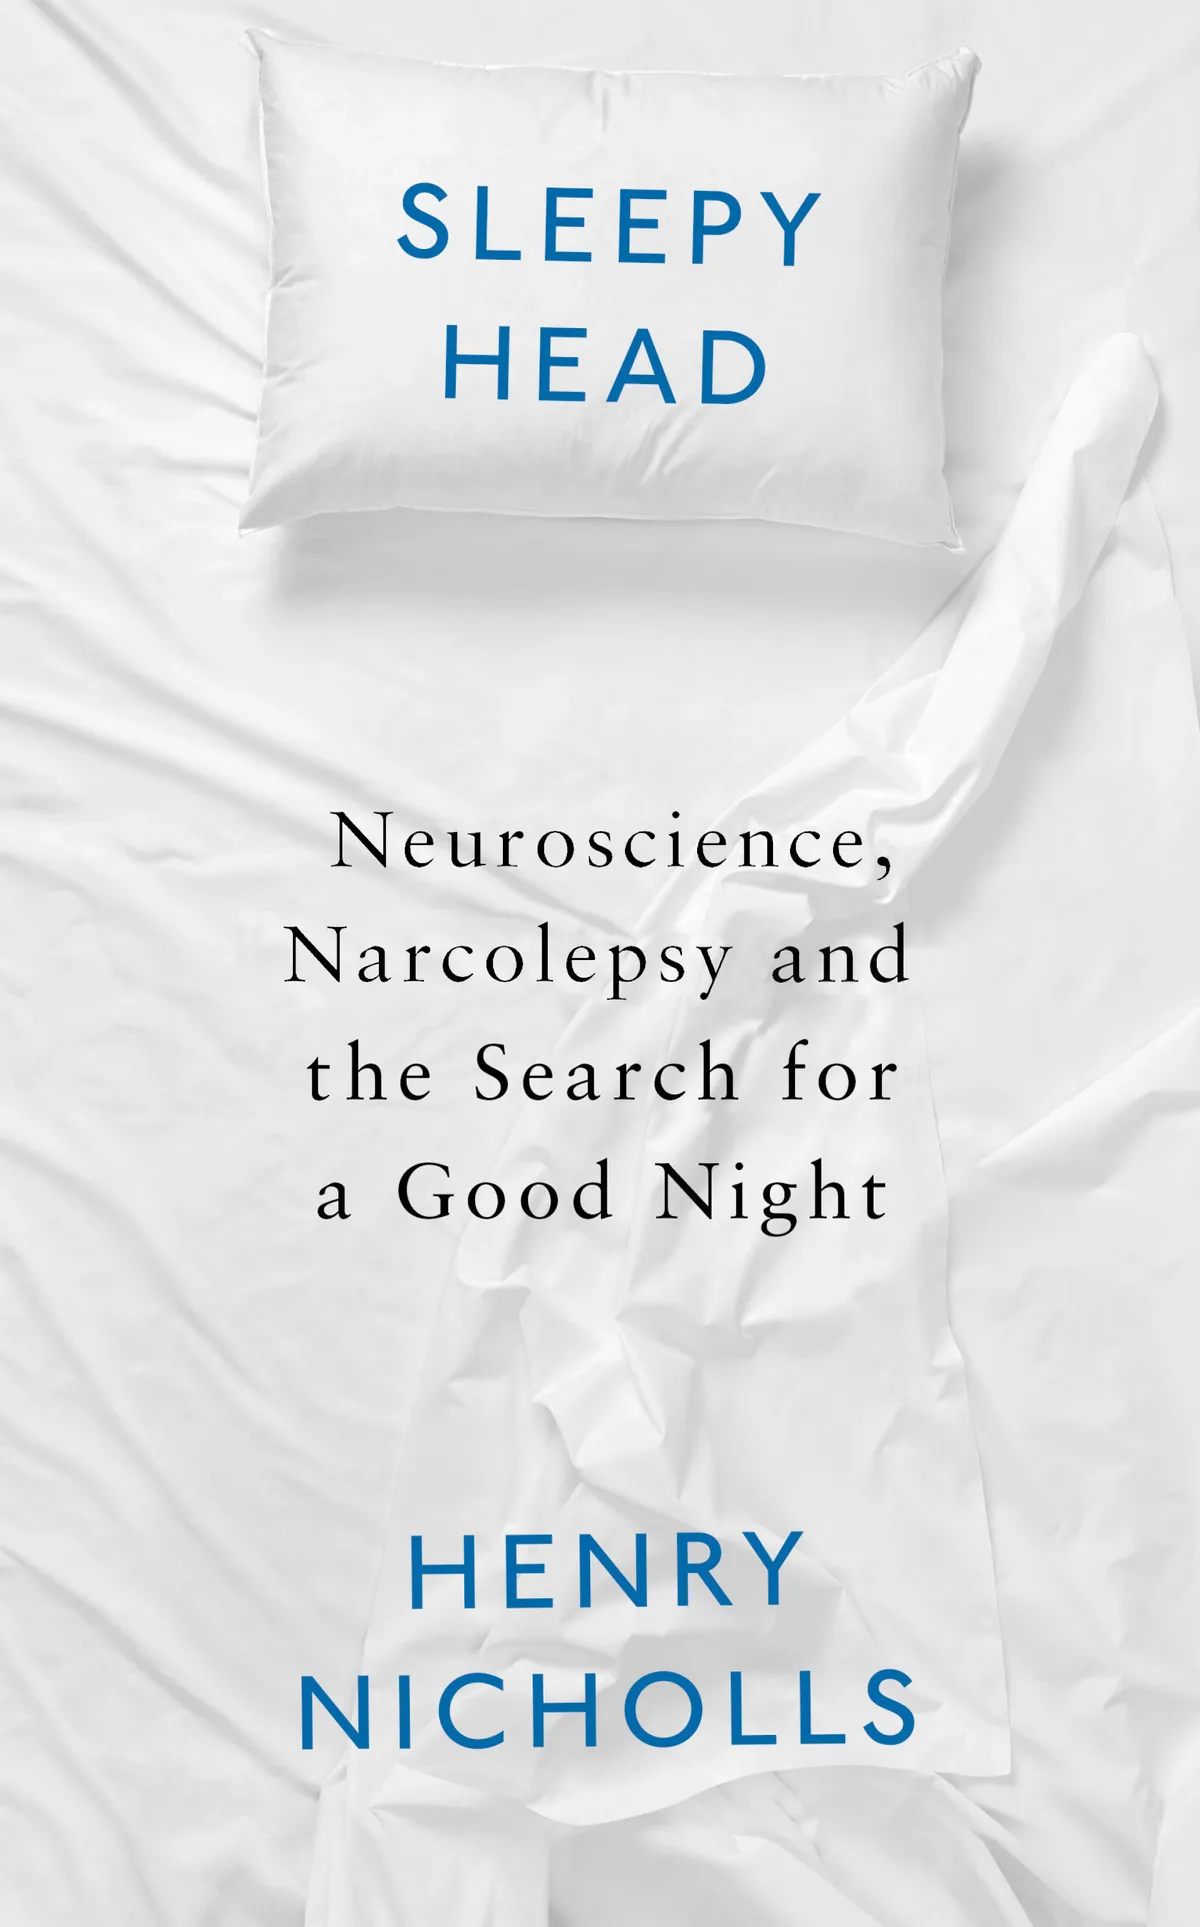 Sleepyhead by Henry Nicholls is out now (£16.99, Profile Books)